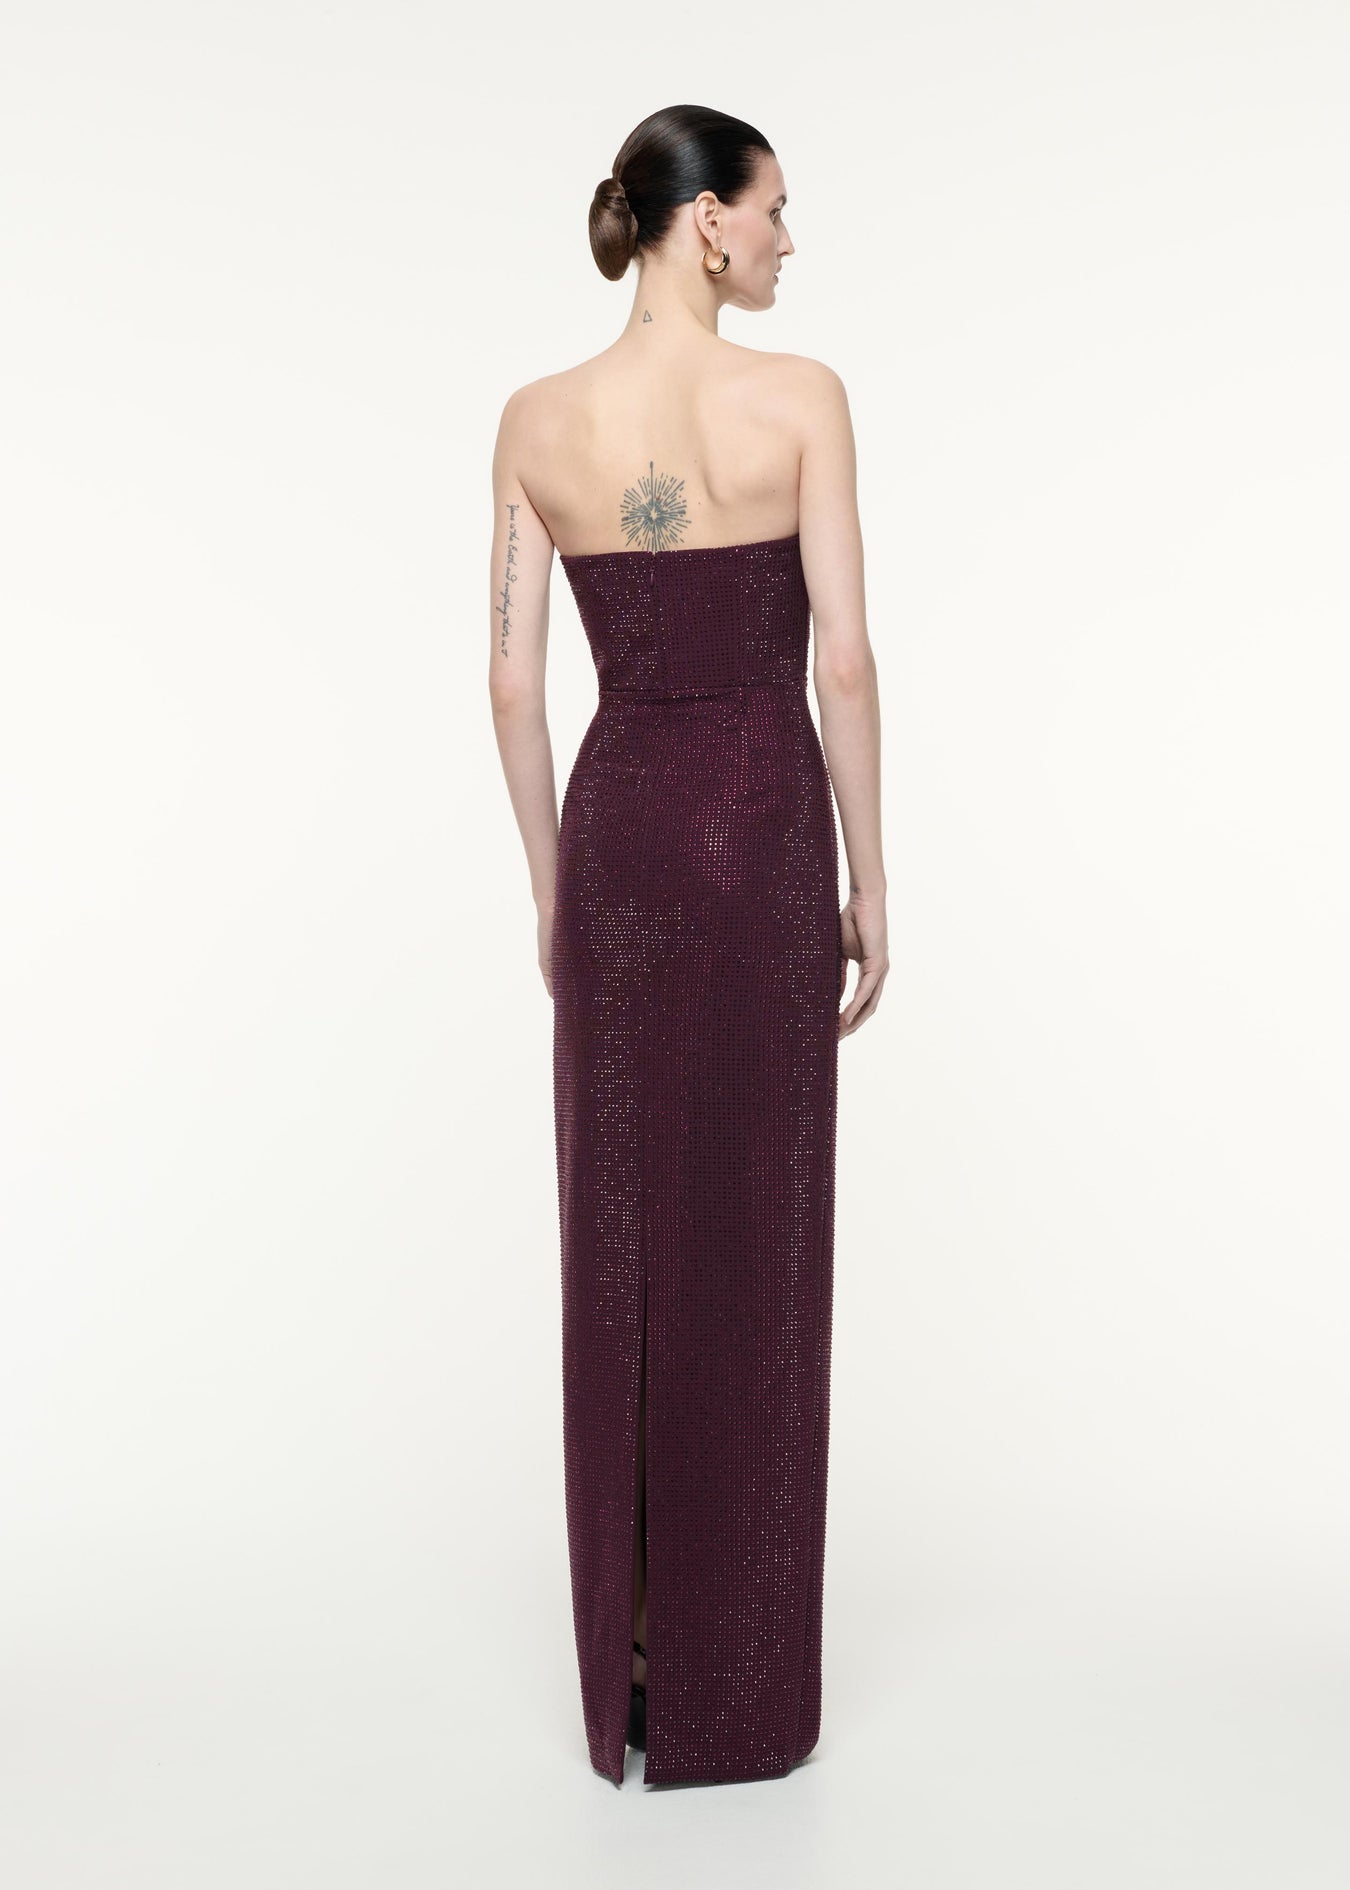 A back view image of a model wearing the Strapless Diamante Gown in Aubergine